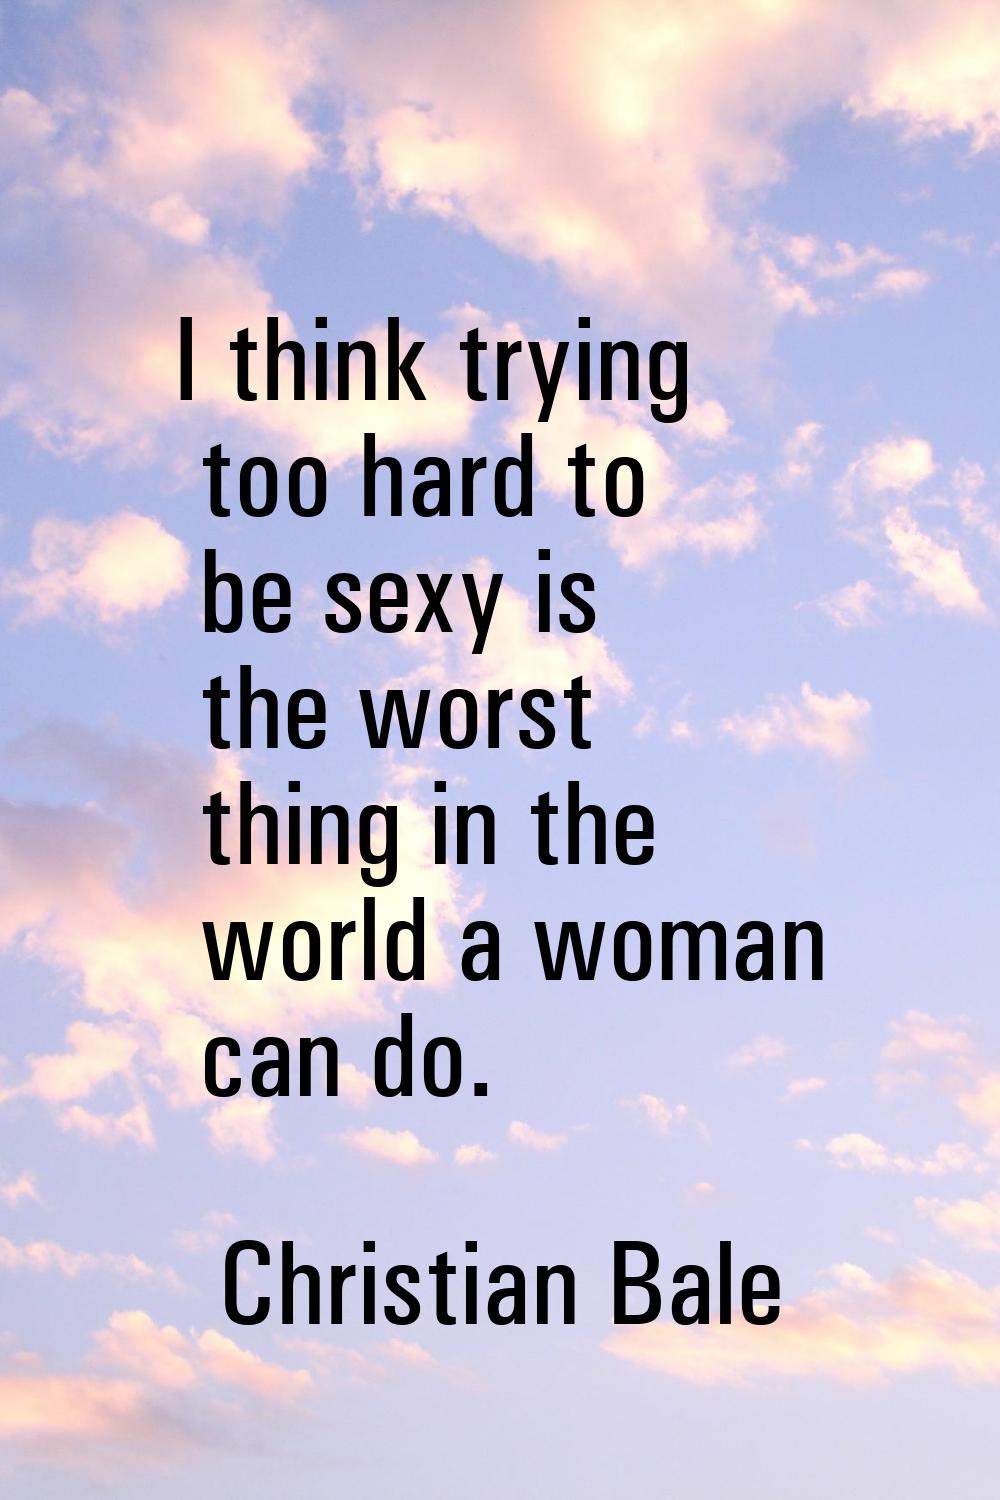 I think trying too hard to be sexy is the worst thing in the world a woman can do.